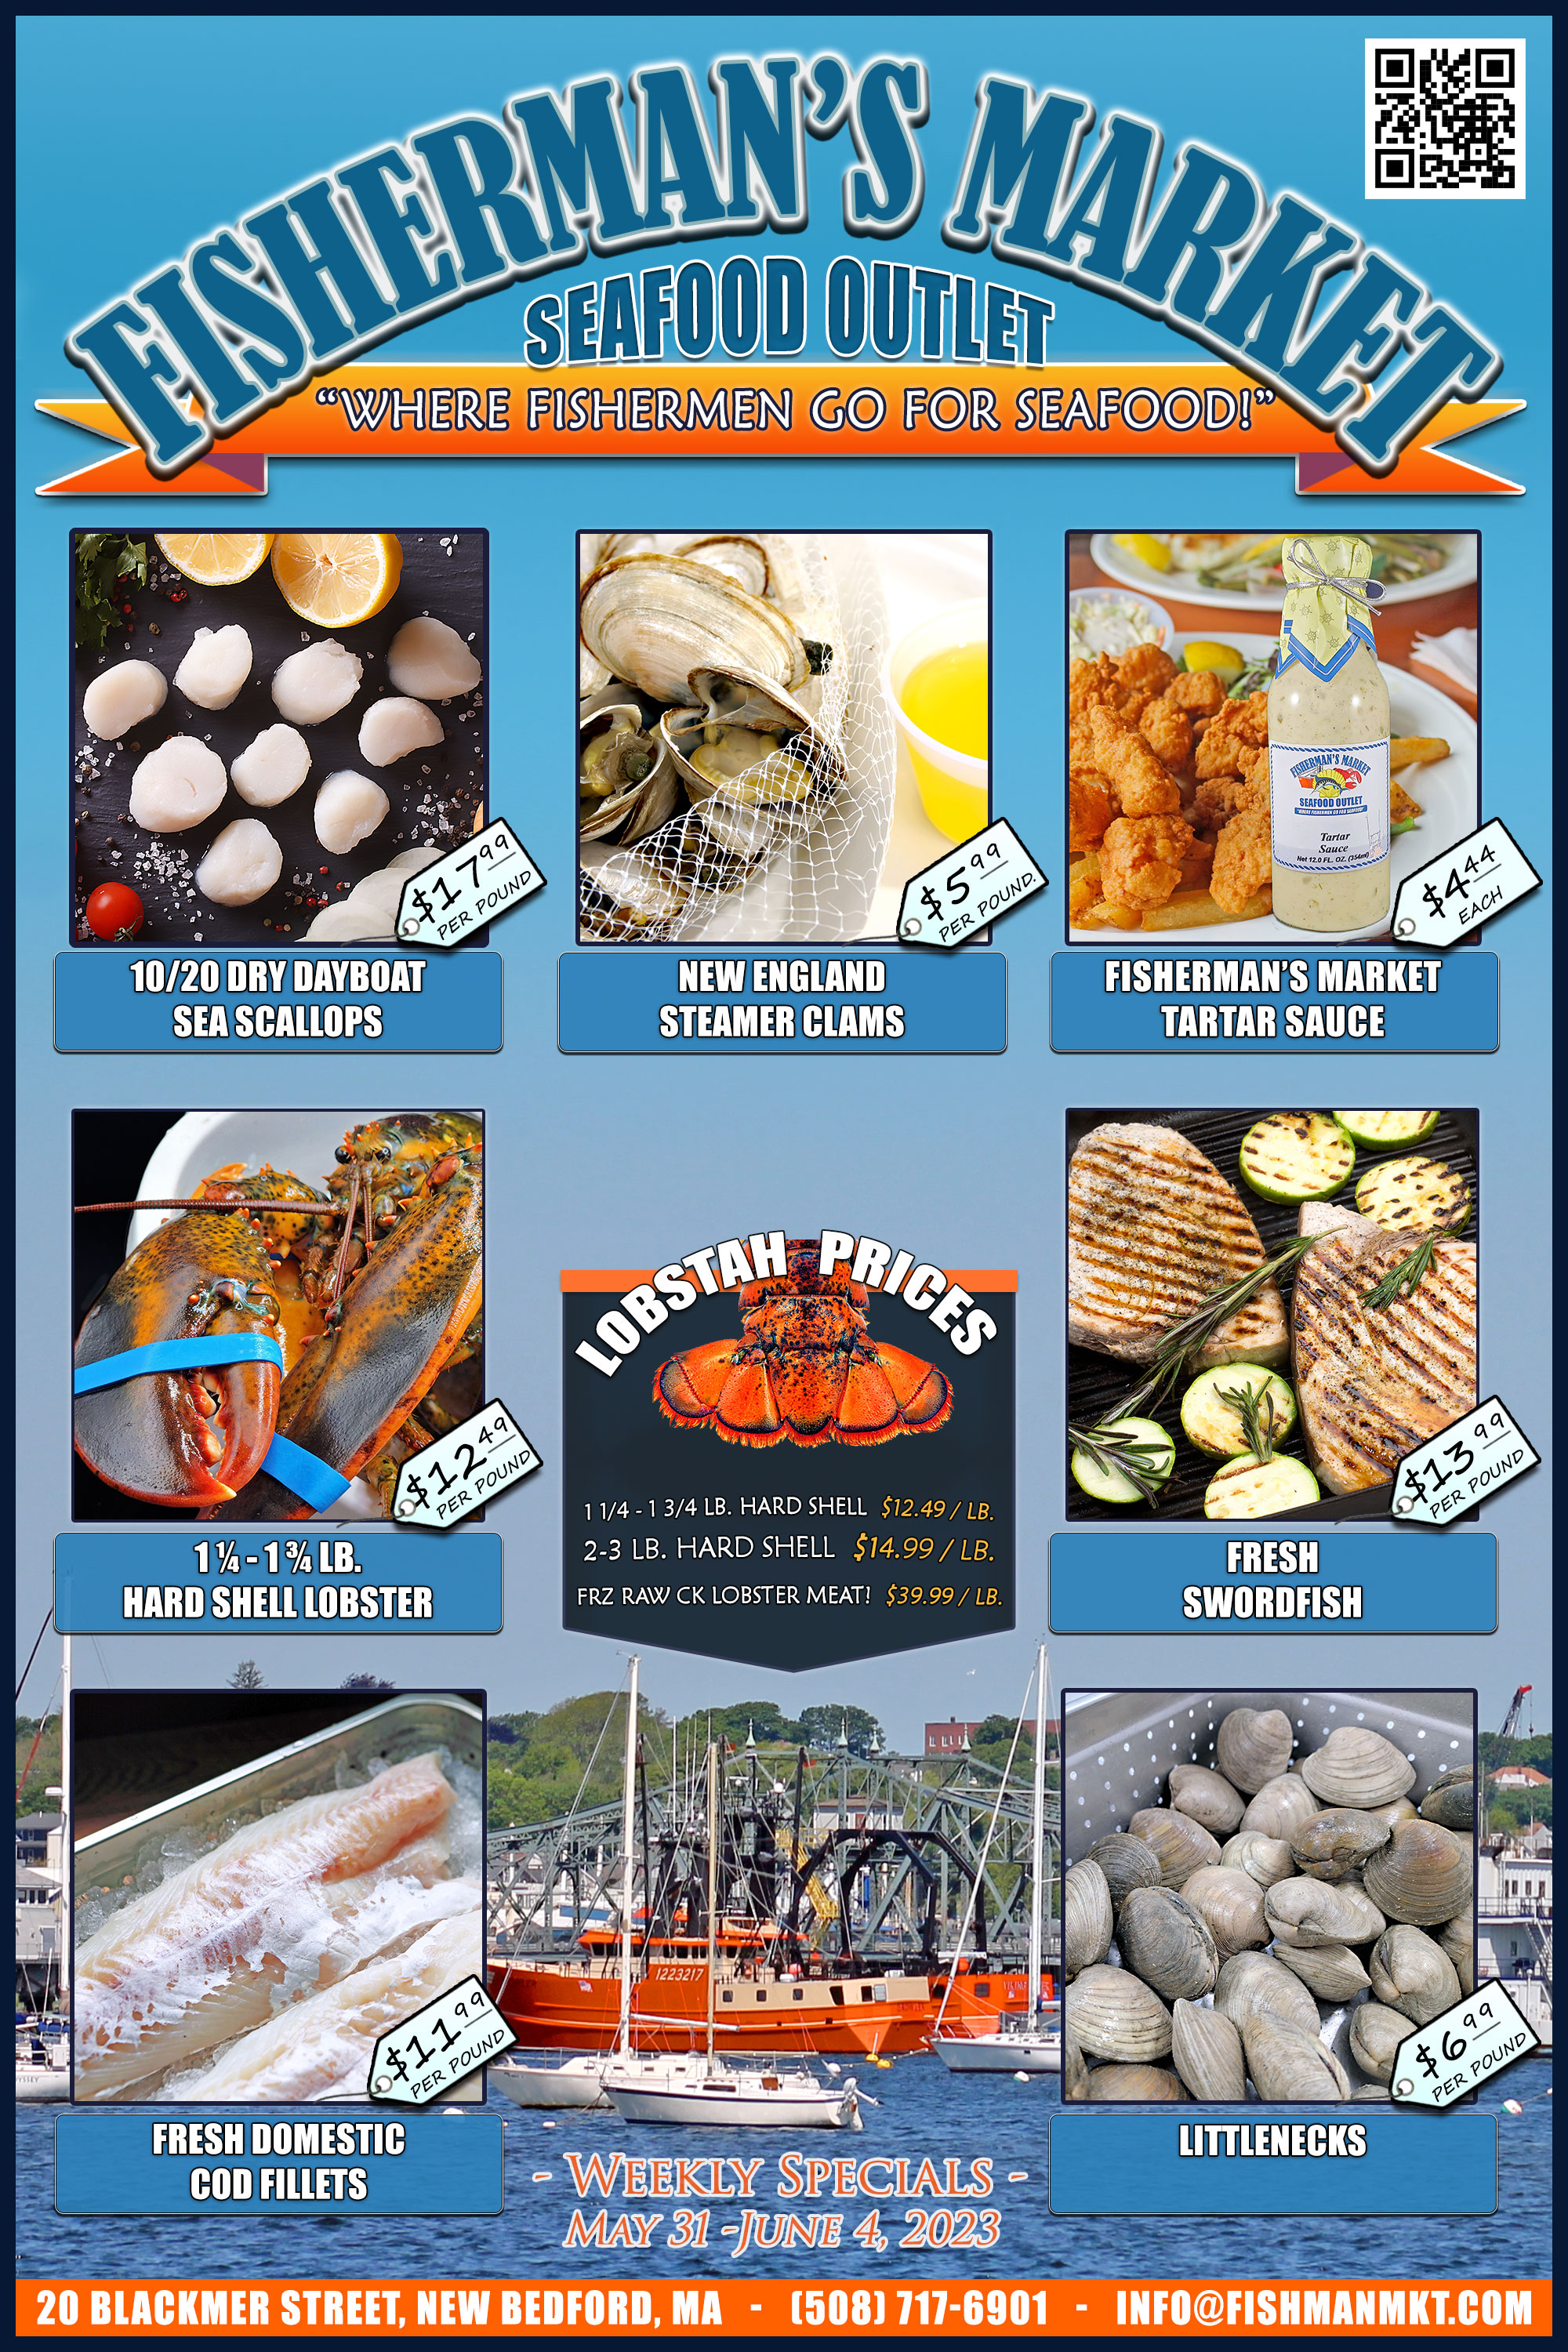 Fisherman's Market Seafood Outlet Weekly Specials &amp; Deals!